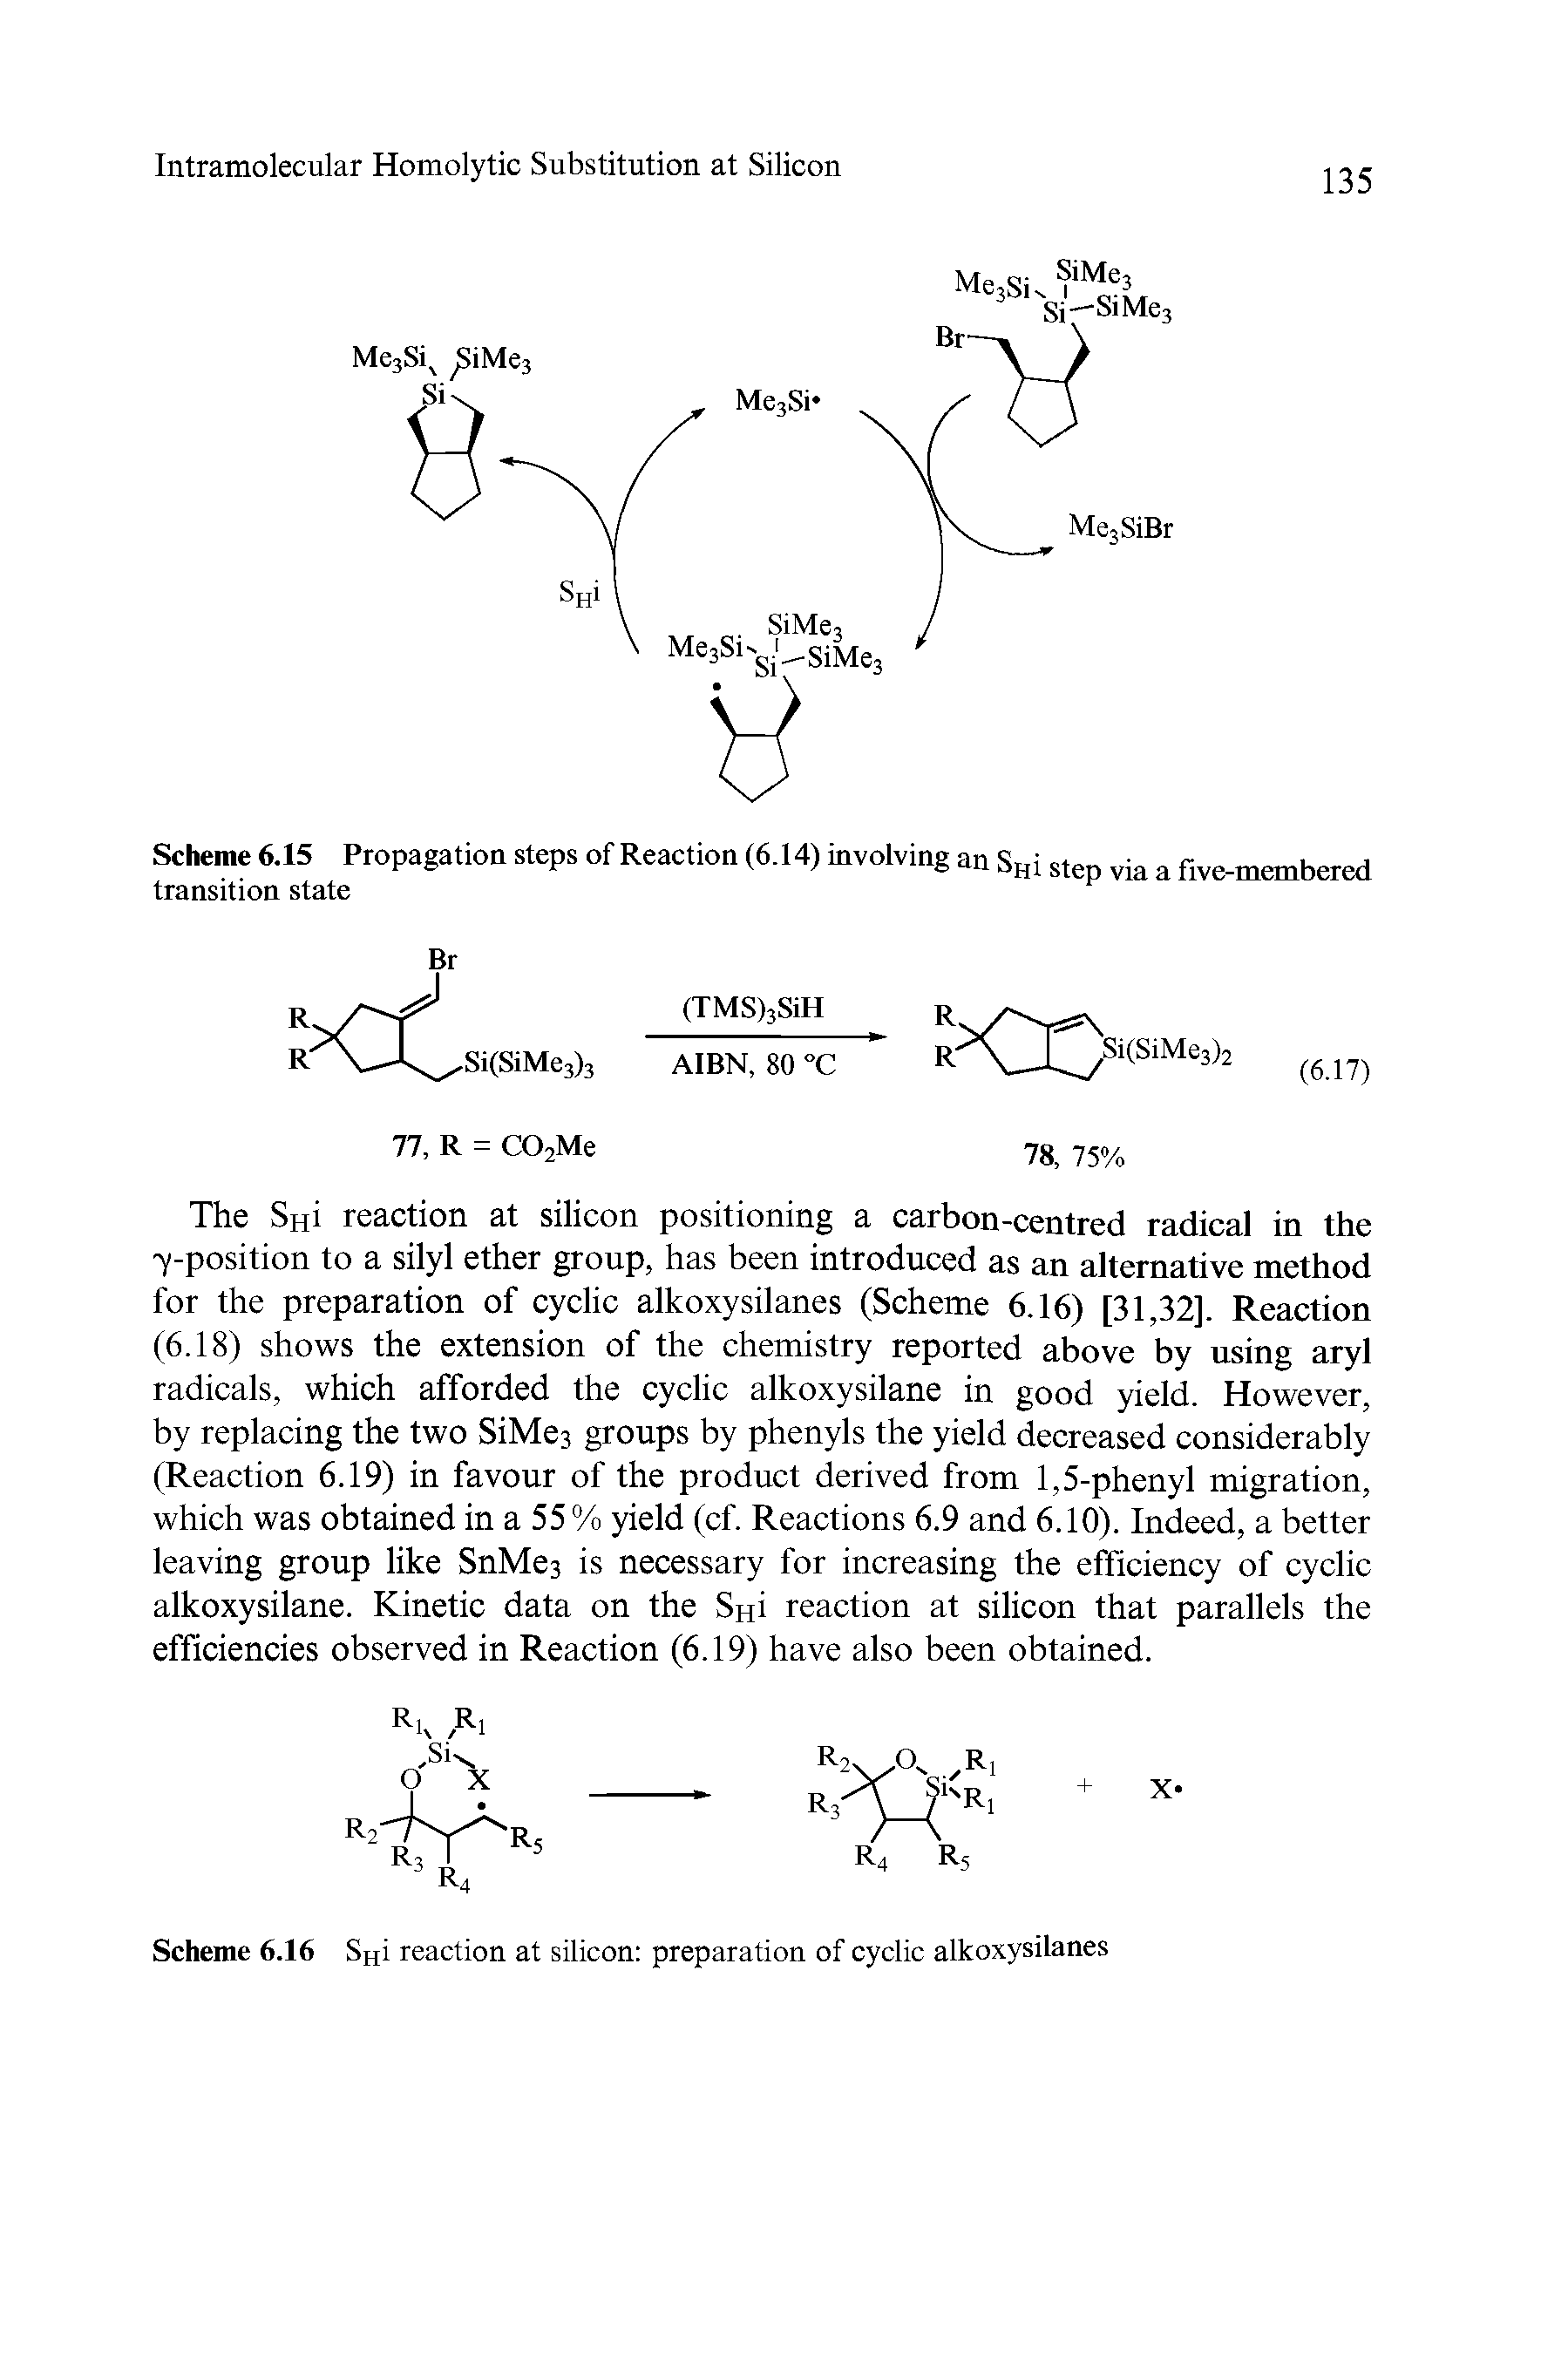 Scheme 6.15 Propagation steps of Reaction (6.14) involving an ShI step via a five-membered transition state...